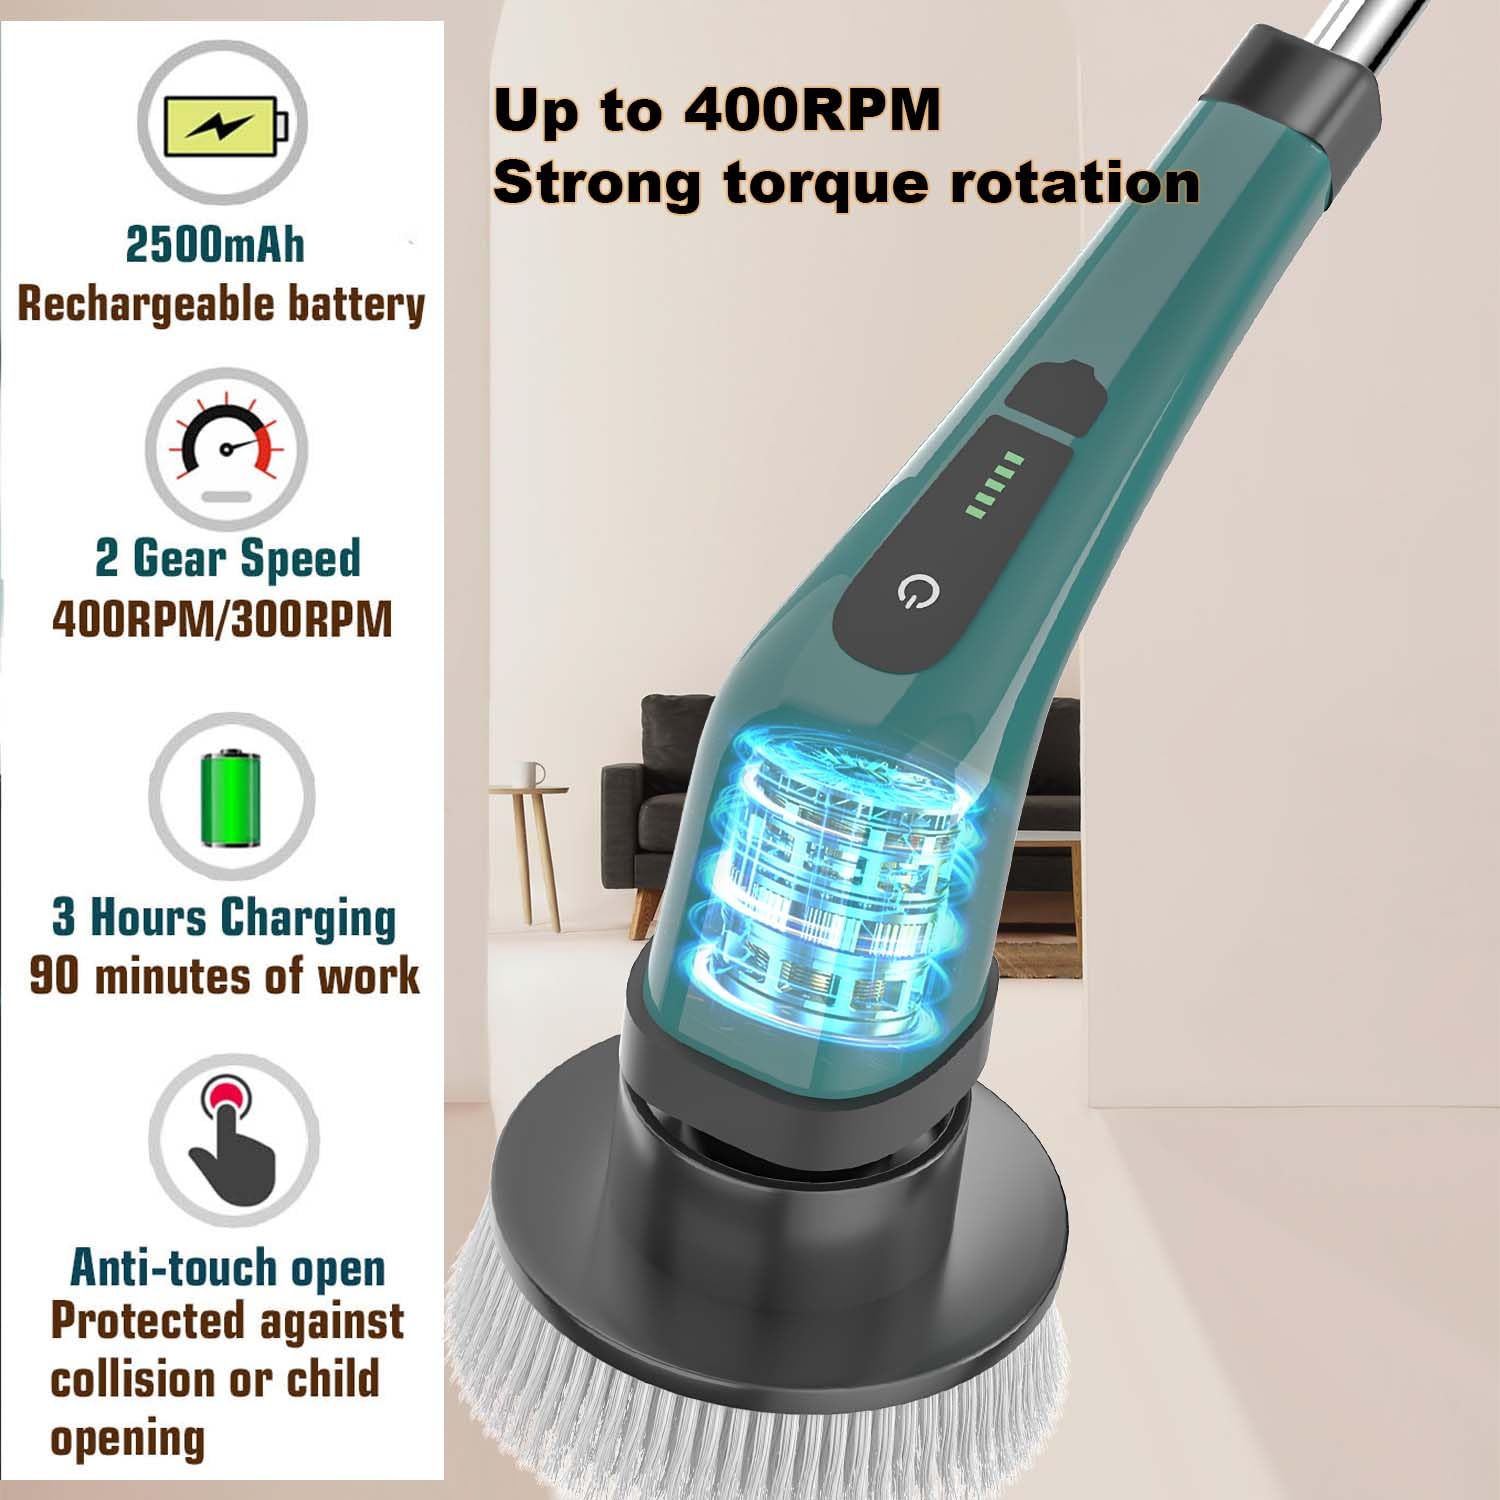 Electric Spin Scrubber, Rechargeable Portable Electric Bathroom Cleaning Brush, 7 Replaceable Cleaning Brush Heads for Kitchen, Tile, Sink, Window, Floor, Tub, Grout